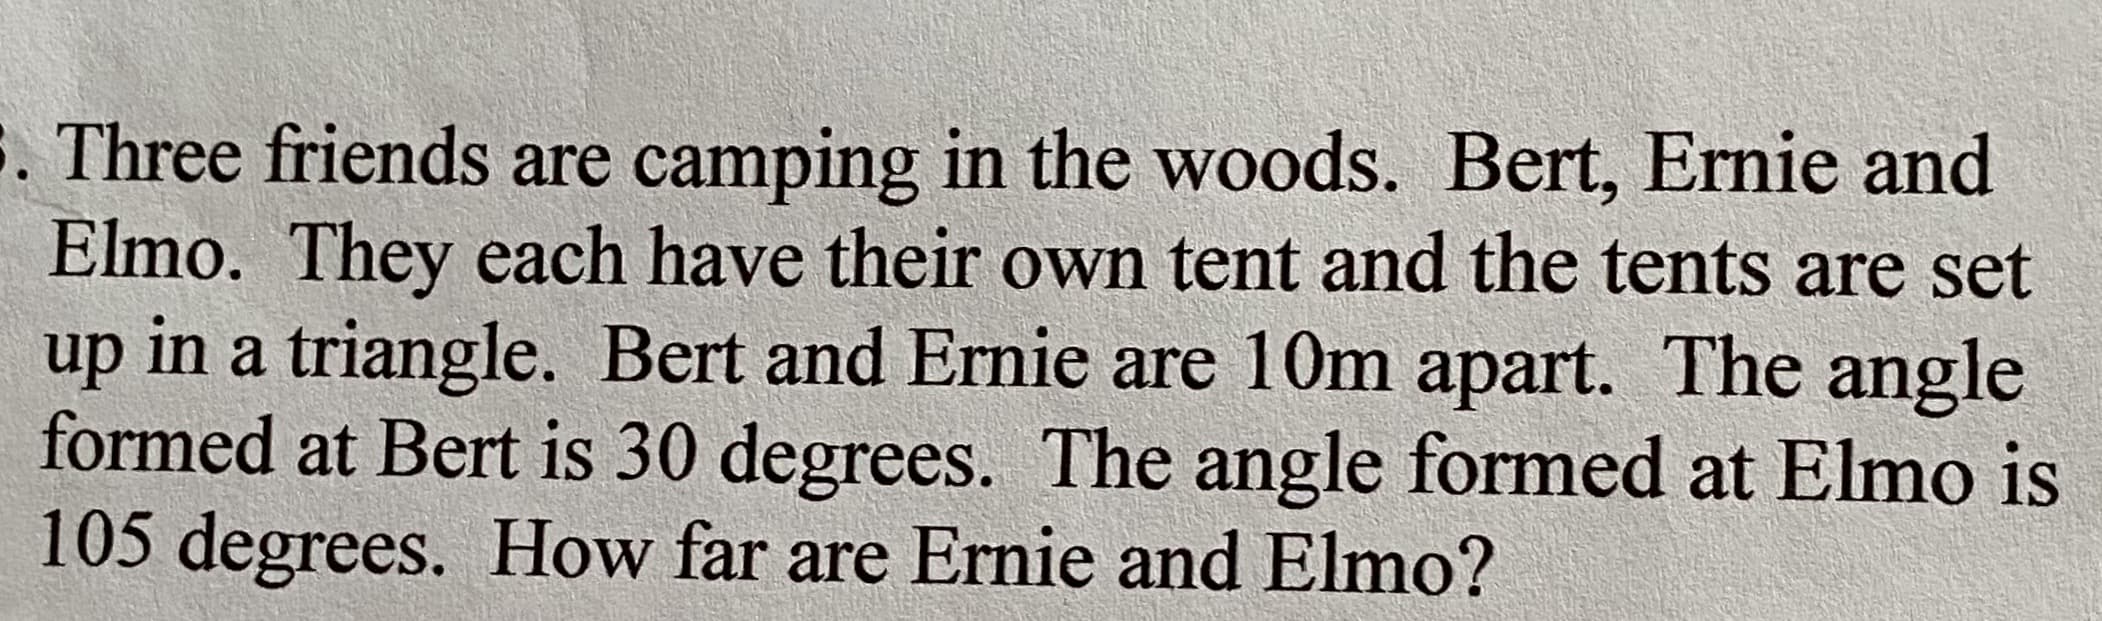 Three friends are camping in the woods. Bert, Ernie and
Elmo. They each have their own tent and the tents are set
up in a triangle. Bert and Ernie are 10m apart. The angle
formed at Bert is 30 degrees. The angle formed at Elmo is
105 degrees. How far are Ernie and Elmo?
